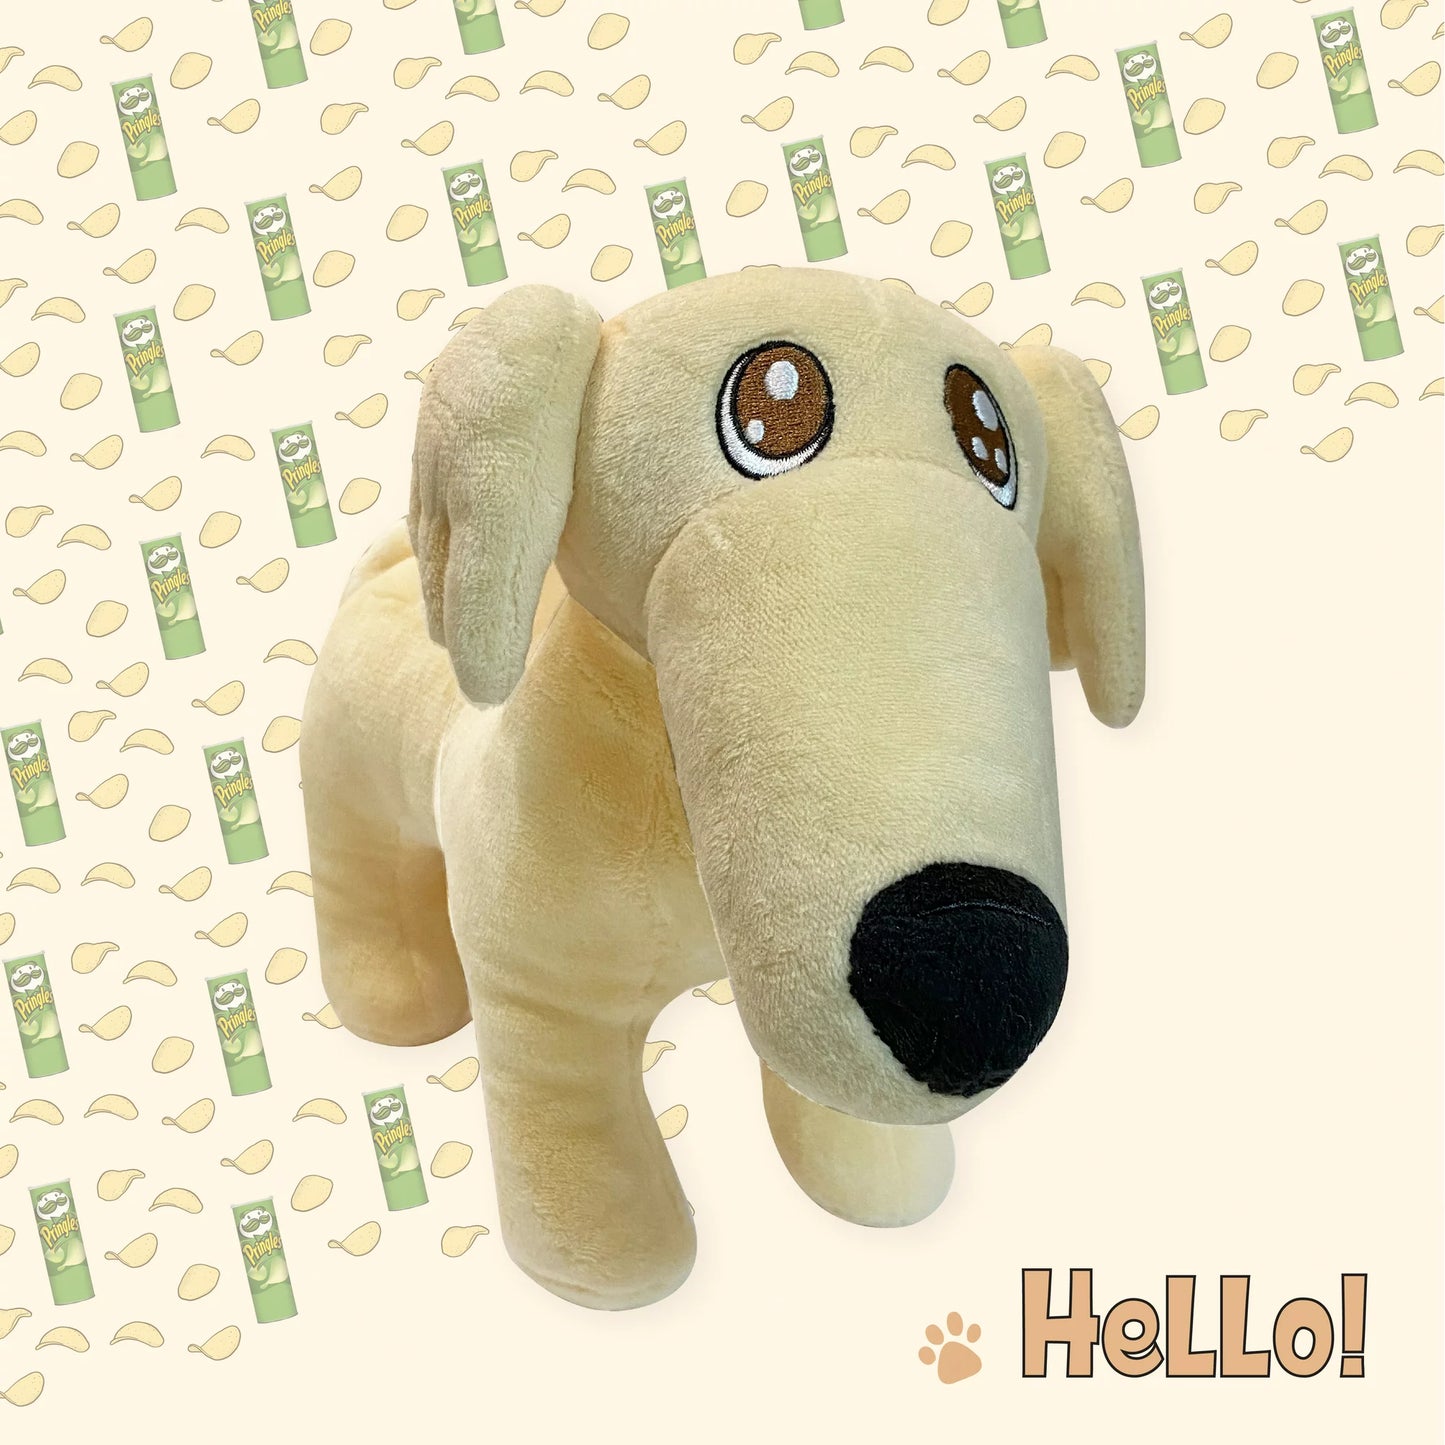 Singing Borzoi Long Nose Meme Dog Plushie - 'Let Me Do It for You' - A Symphony of Cuteness!